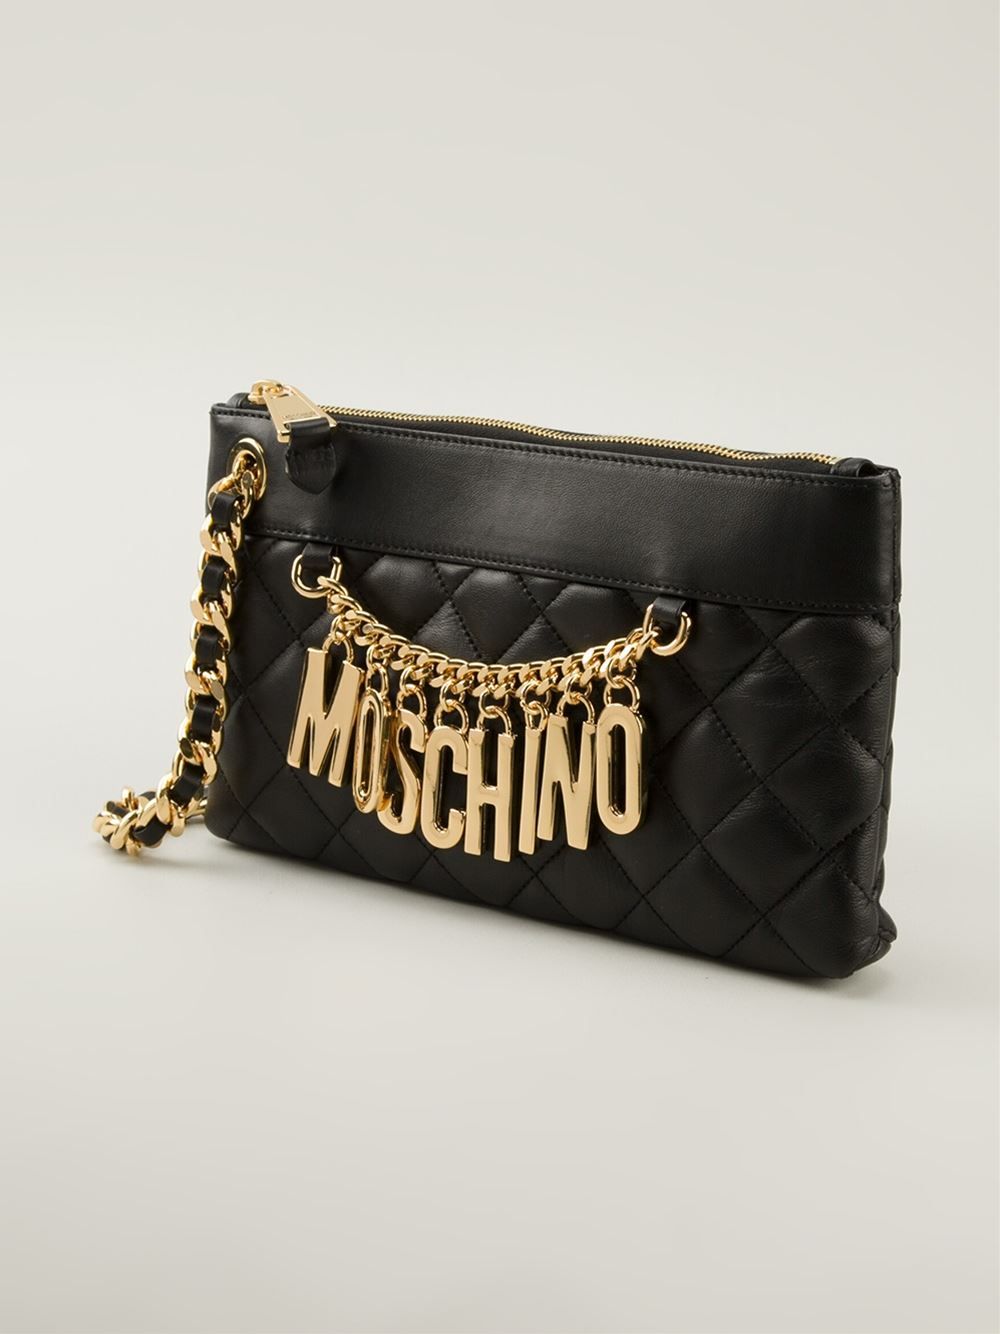 Moschino Quilted Chain Clutch in Black - Lyst